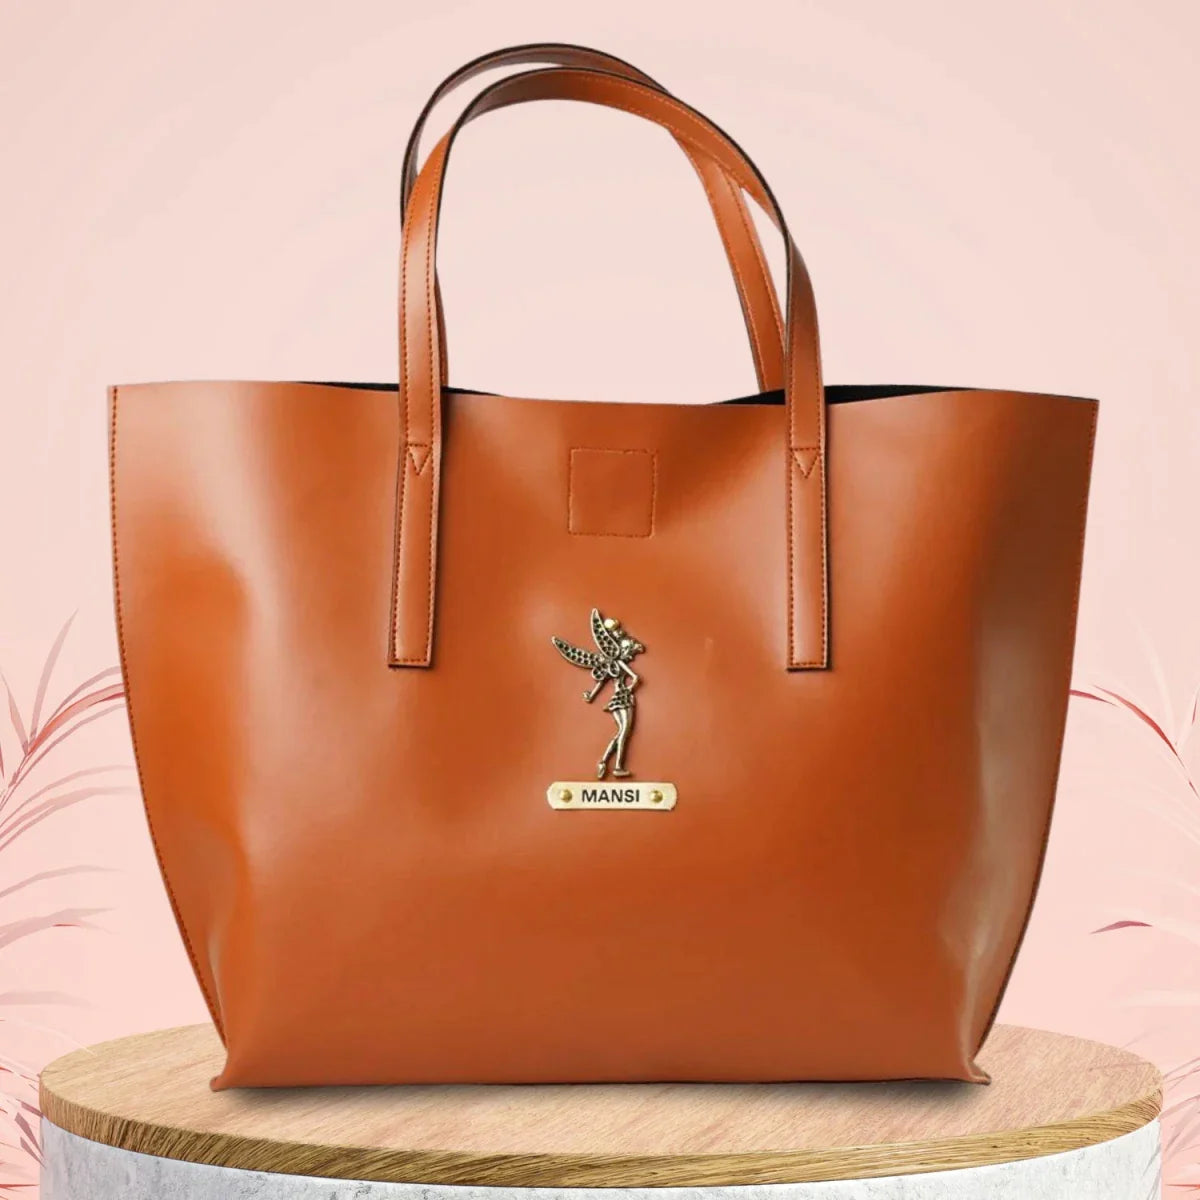 Buy Leather Tote Bags Women, Personalized Tote With Zipper Option, Monogram Tote  Bag Purse Handbag Carryall Bag, Gifts for Women Hides Online in India - Etsy